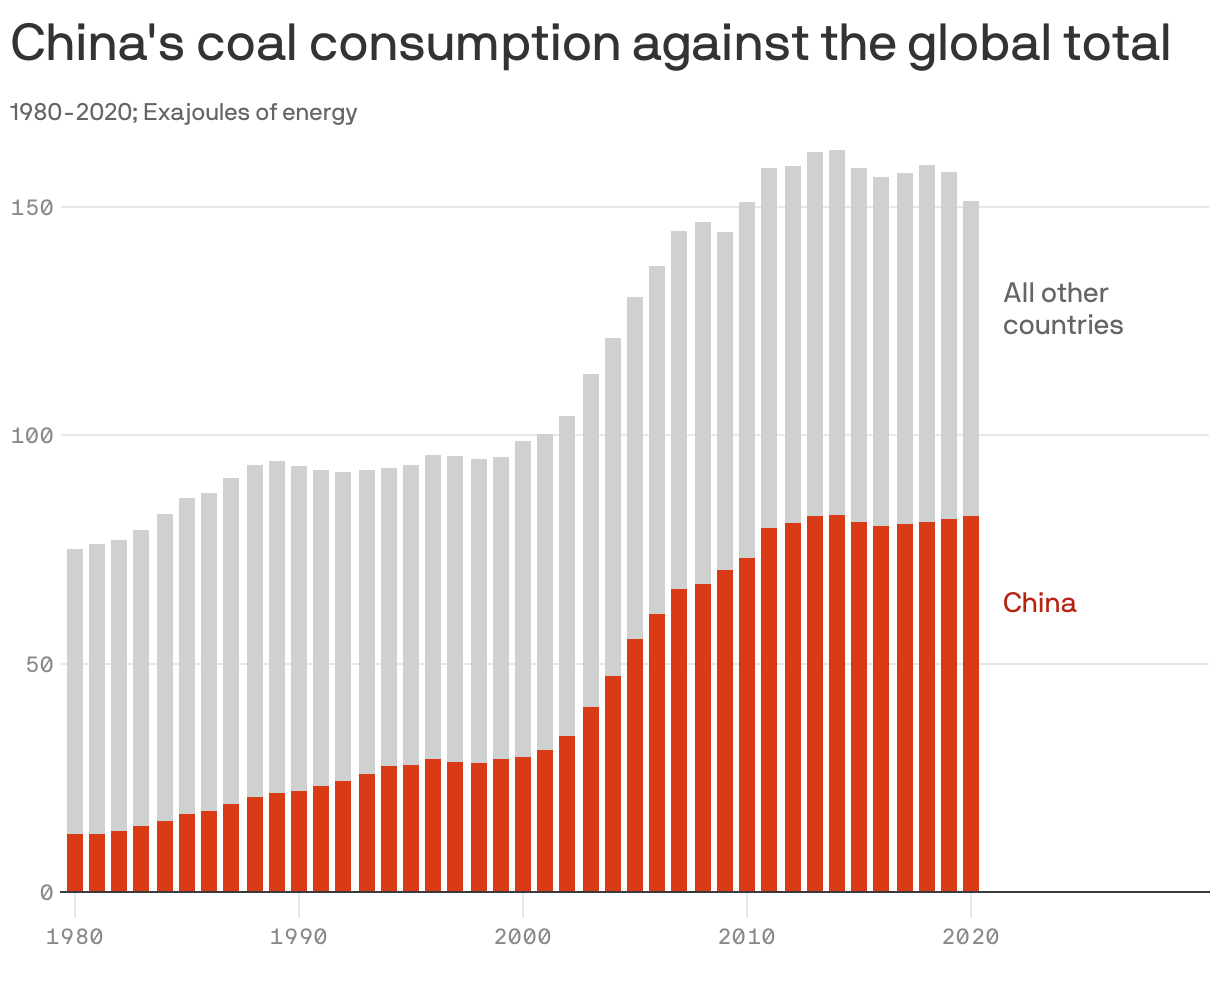 China's coal consumption against the global total